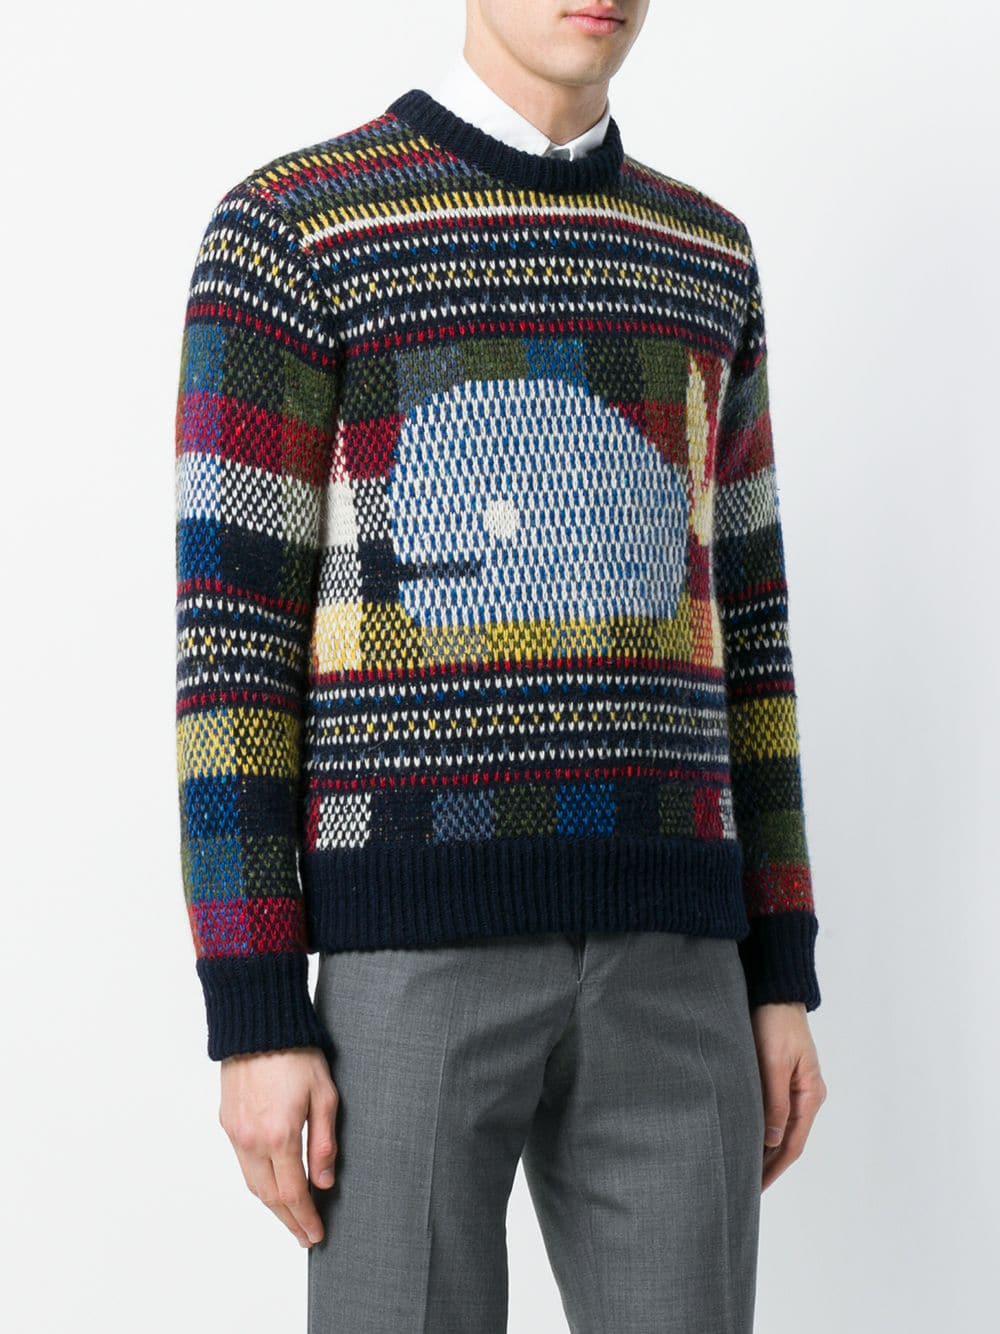 Thom Browne Whale Fair Isle Tweed Pullover in Blue for Men - Lyst